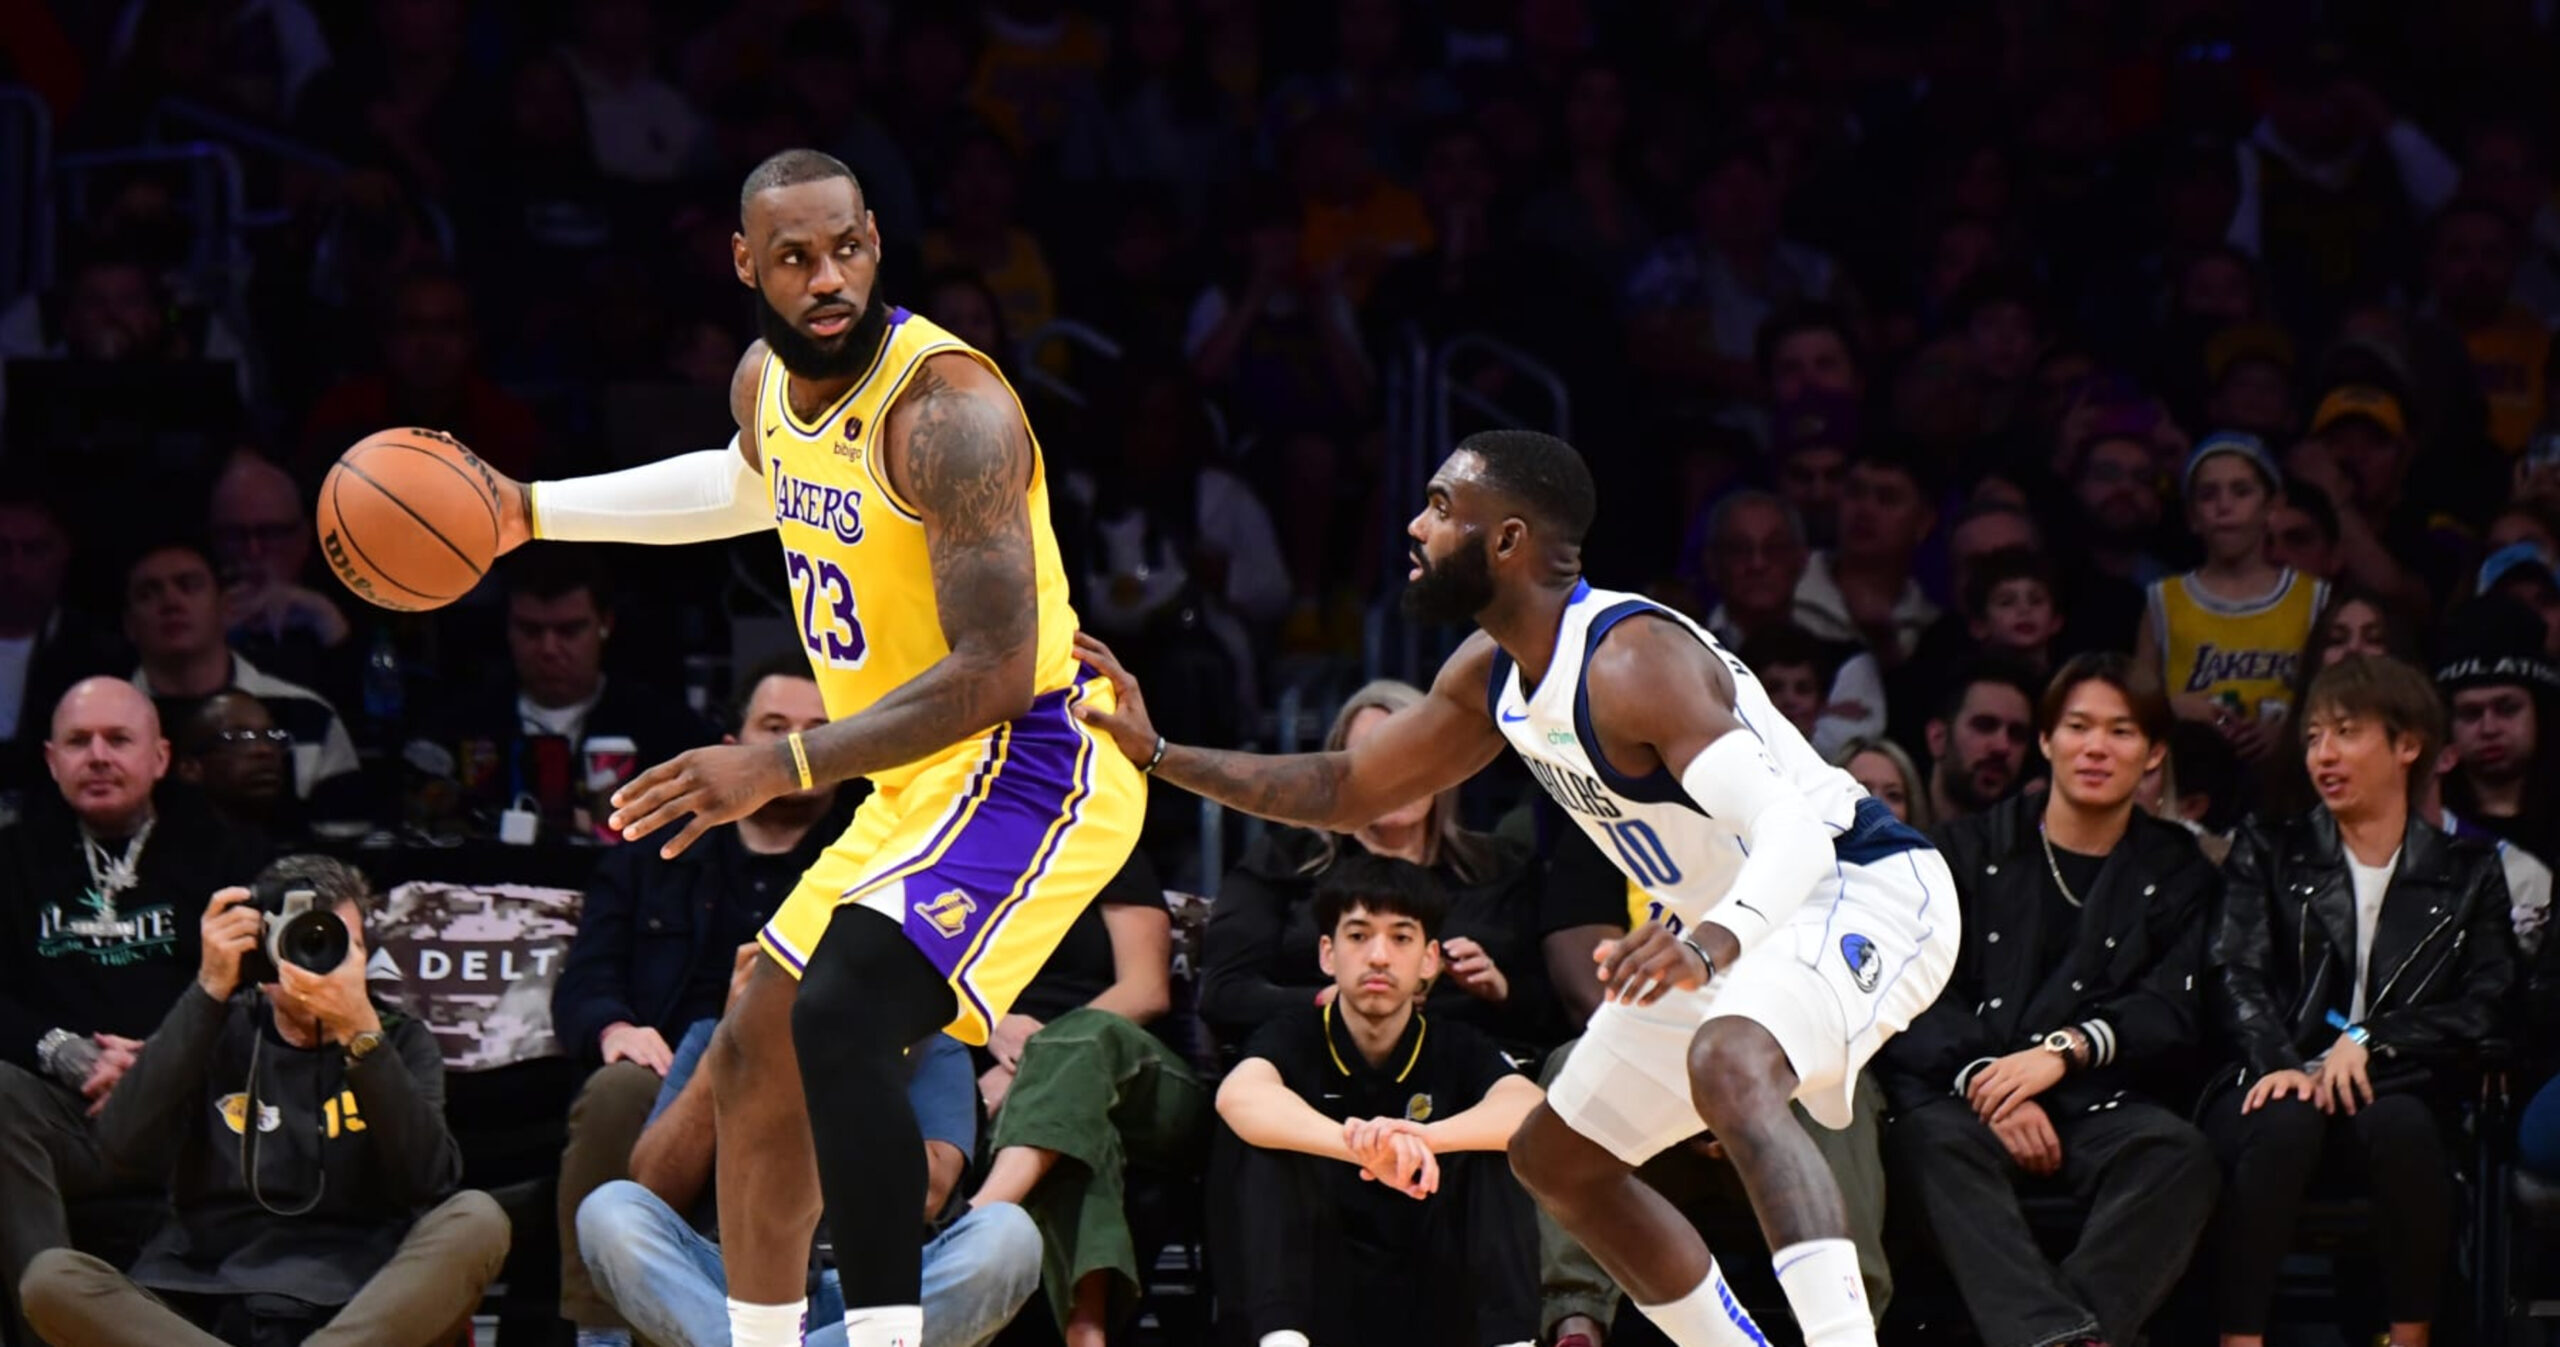 Lakers’ LeBron James Entertains NBA Fans with Shove of Mavs’ Kyrie Irving Before Dunk